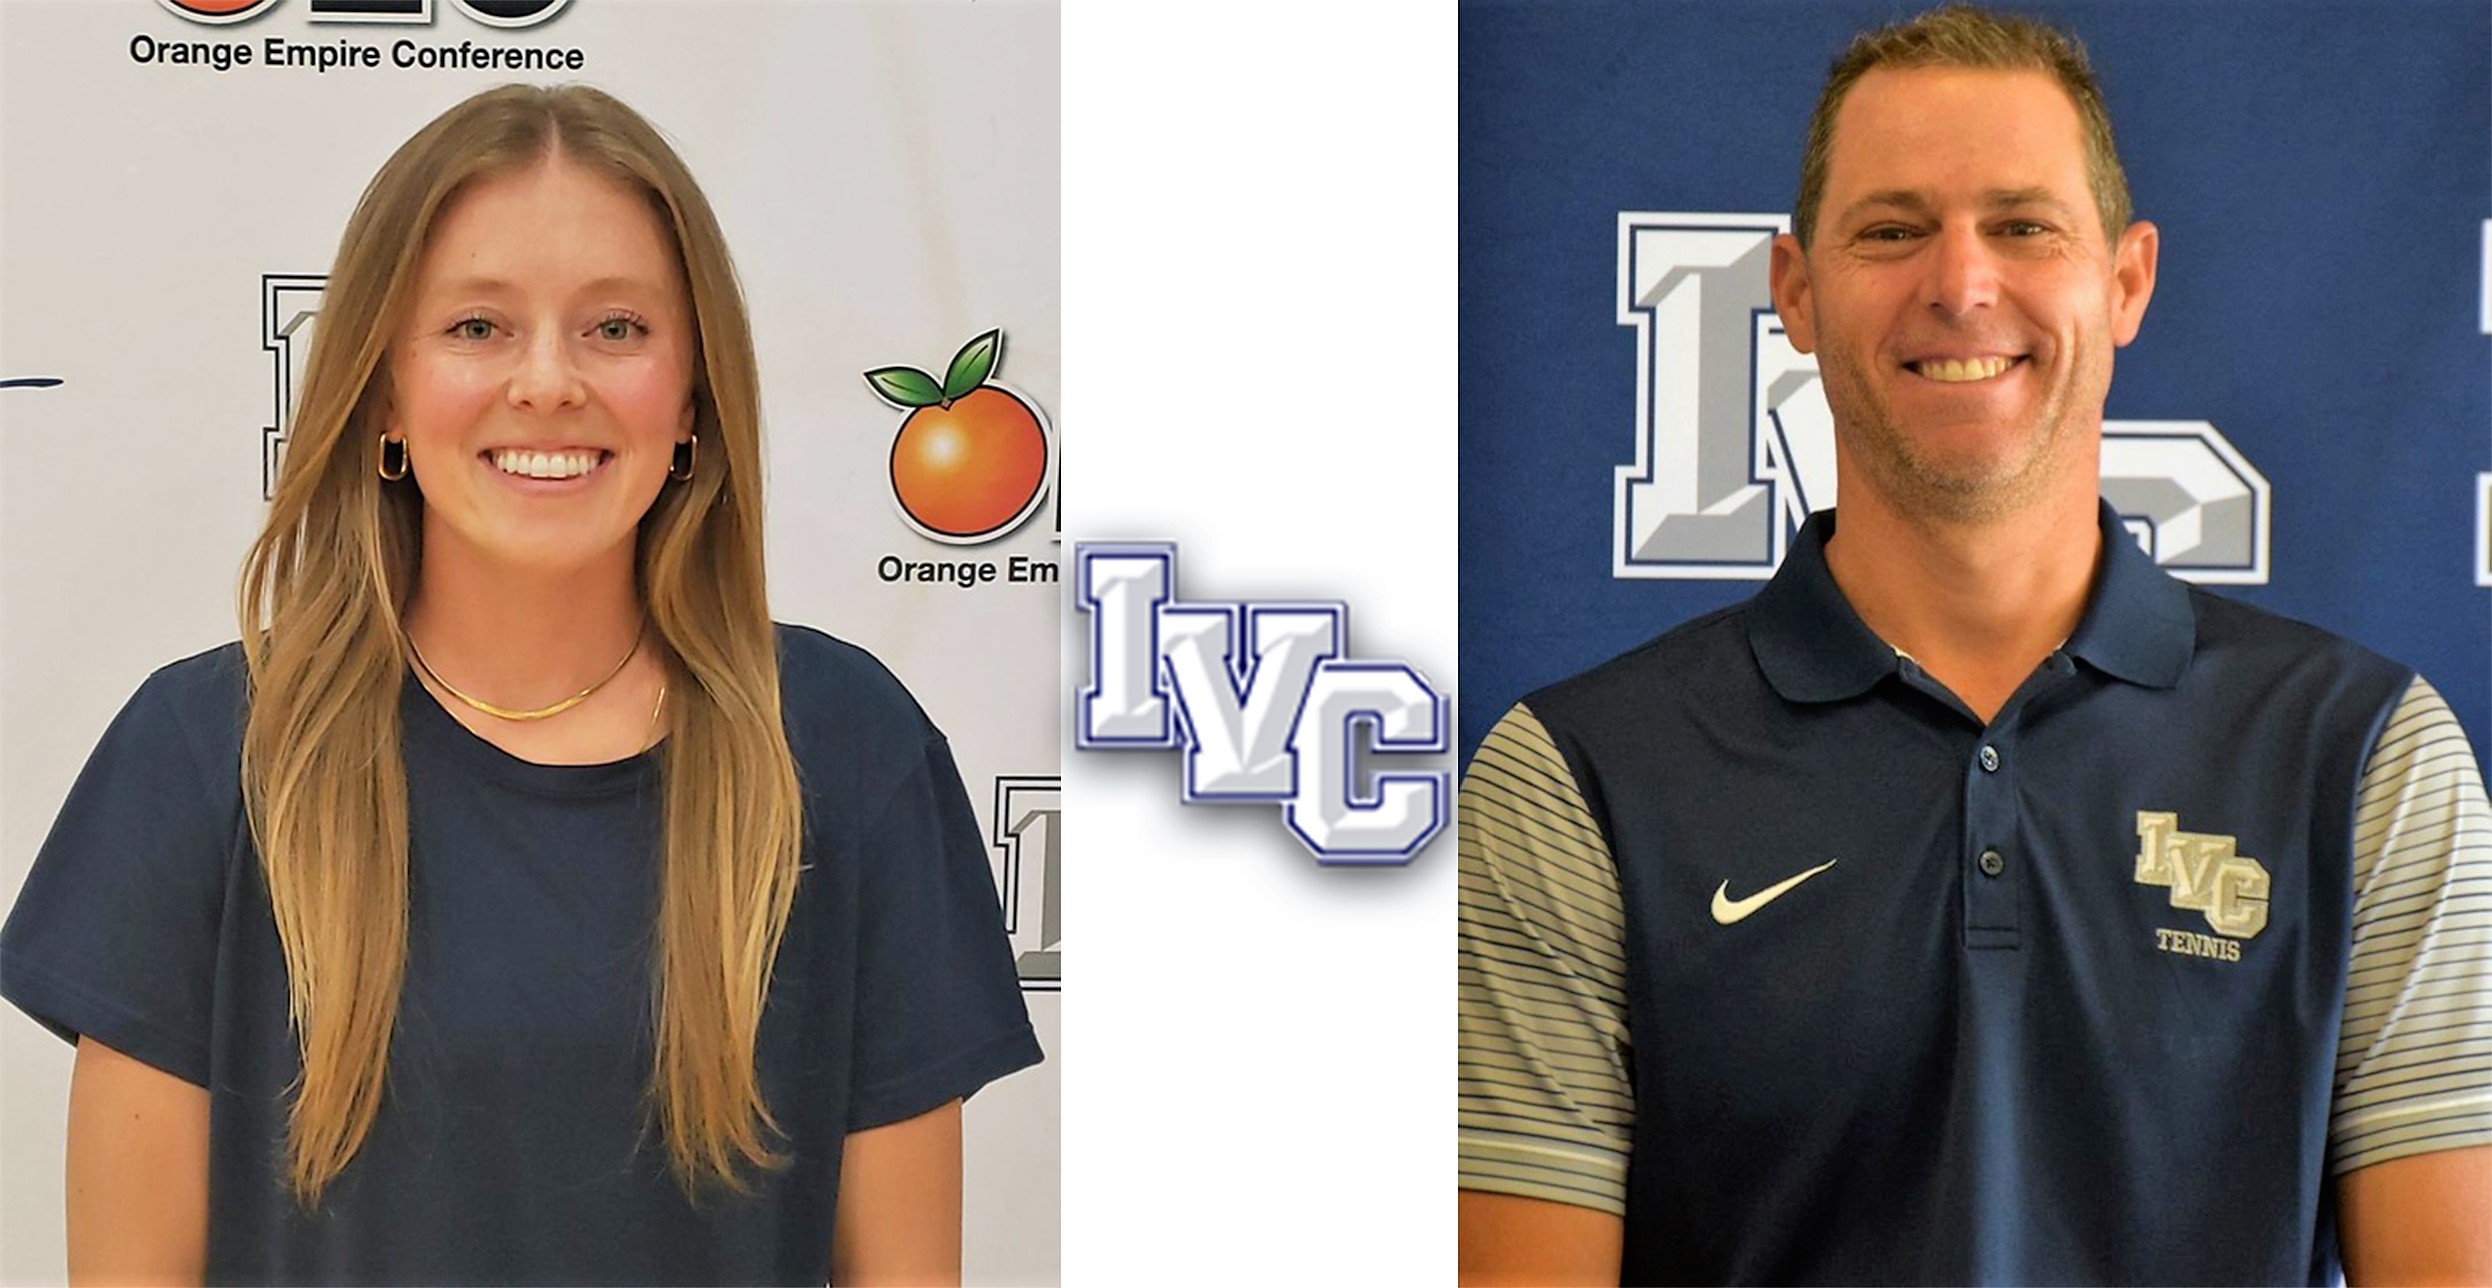 Unke and Duncan are Irvine Valley's 23-24 coaches of the year